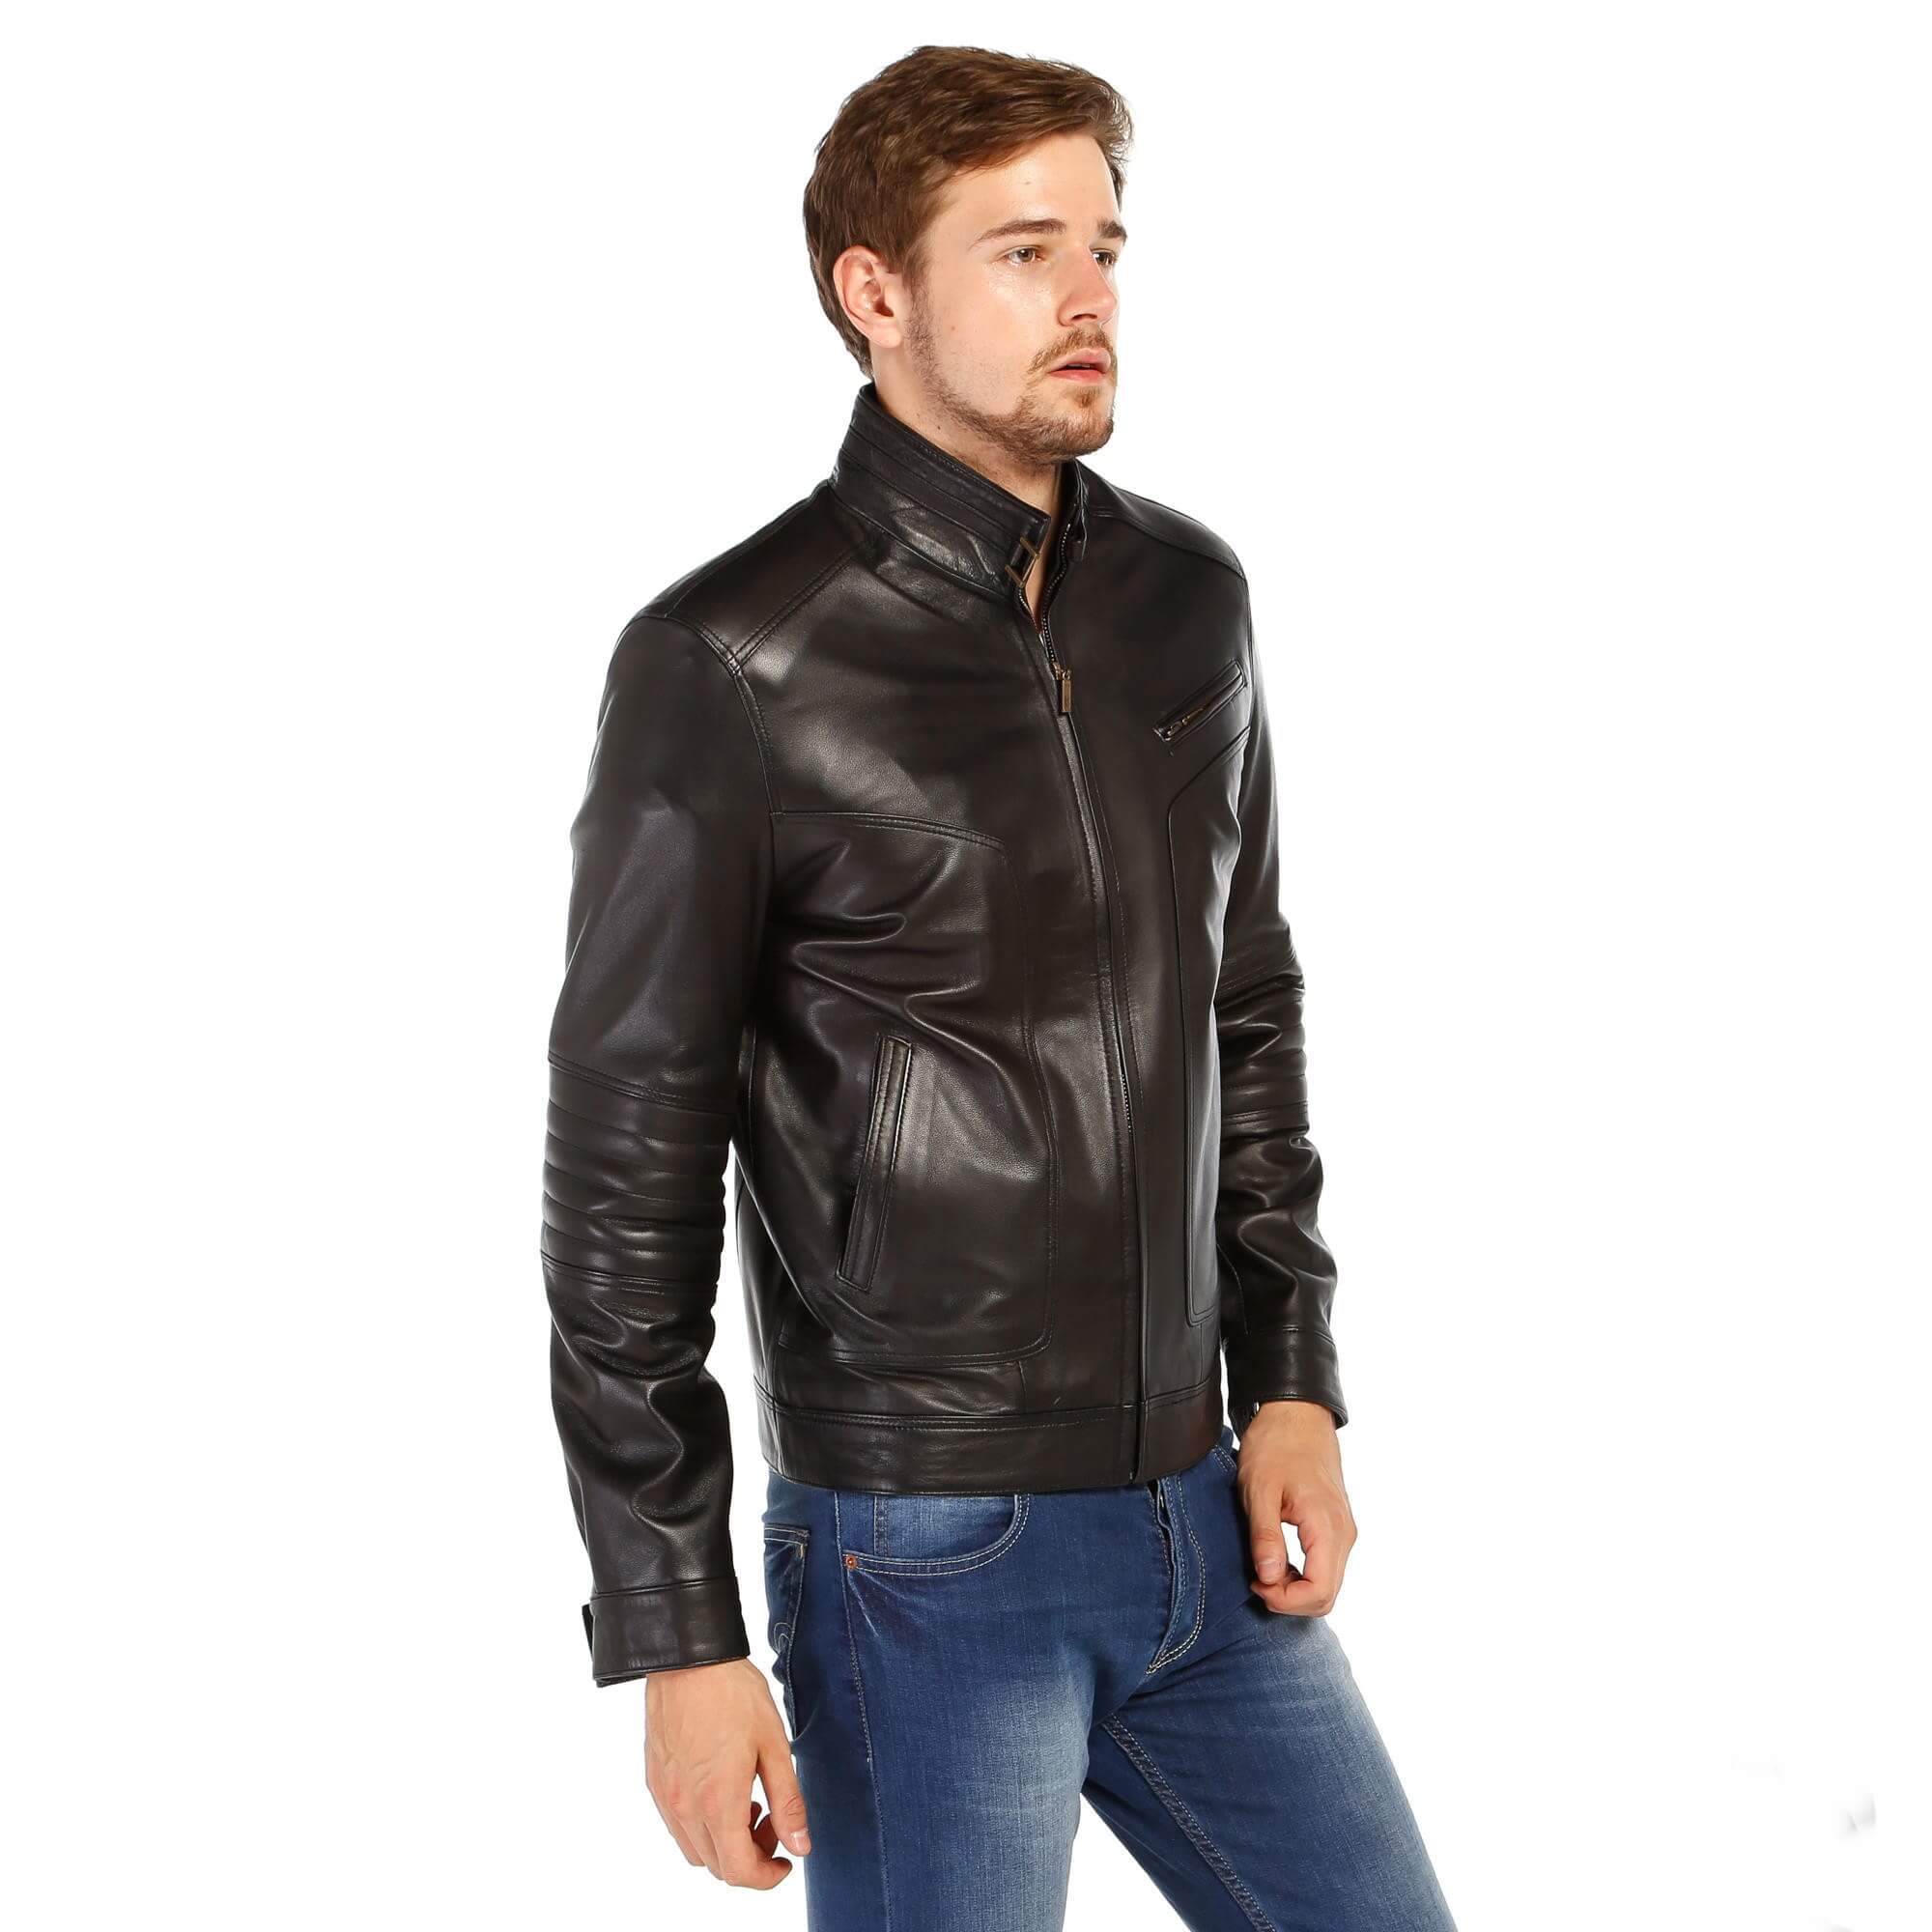 How to Pack A Leather Jacket? Folding Leather Jackets - The Jacket Maker  Blog